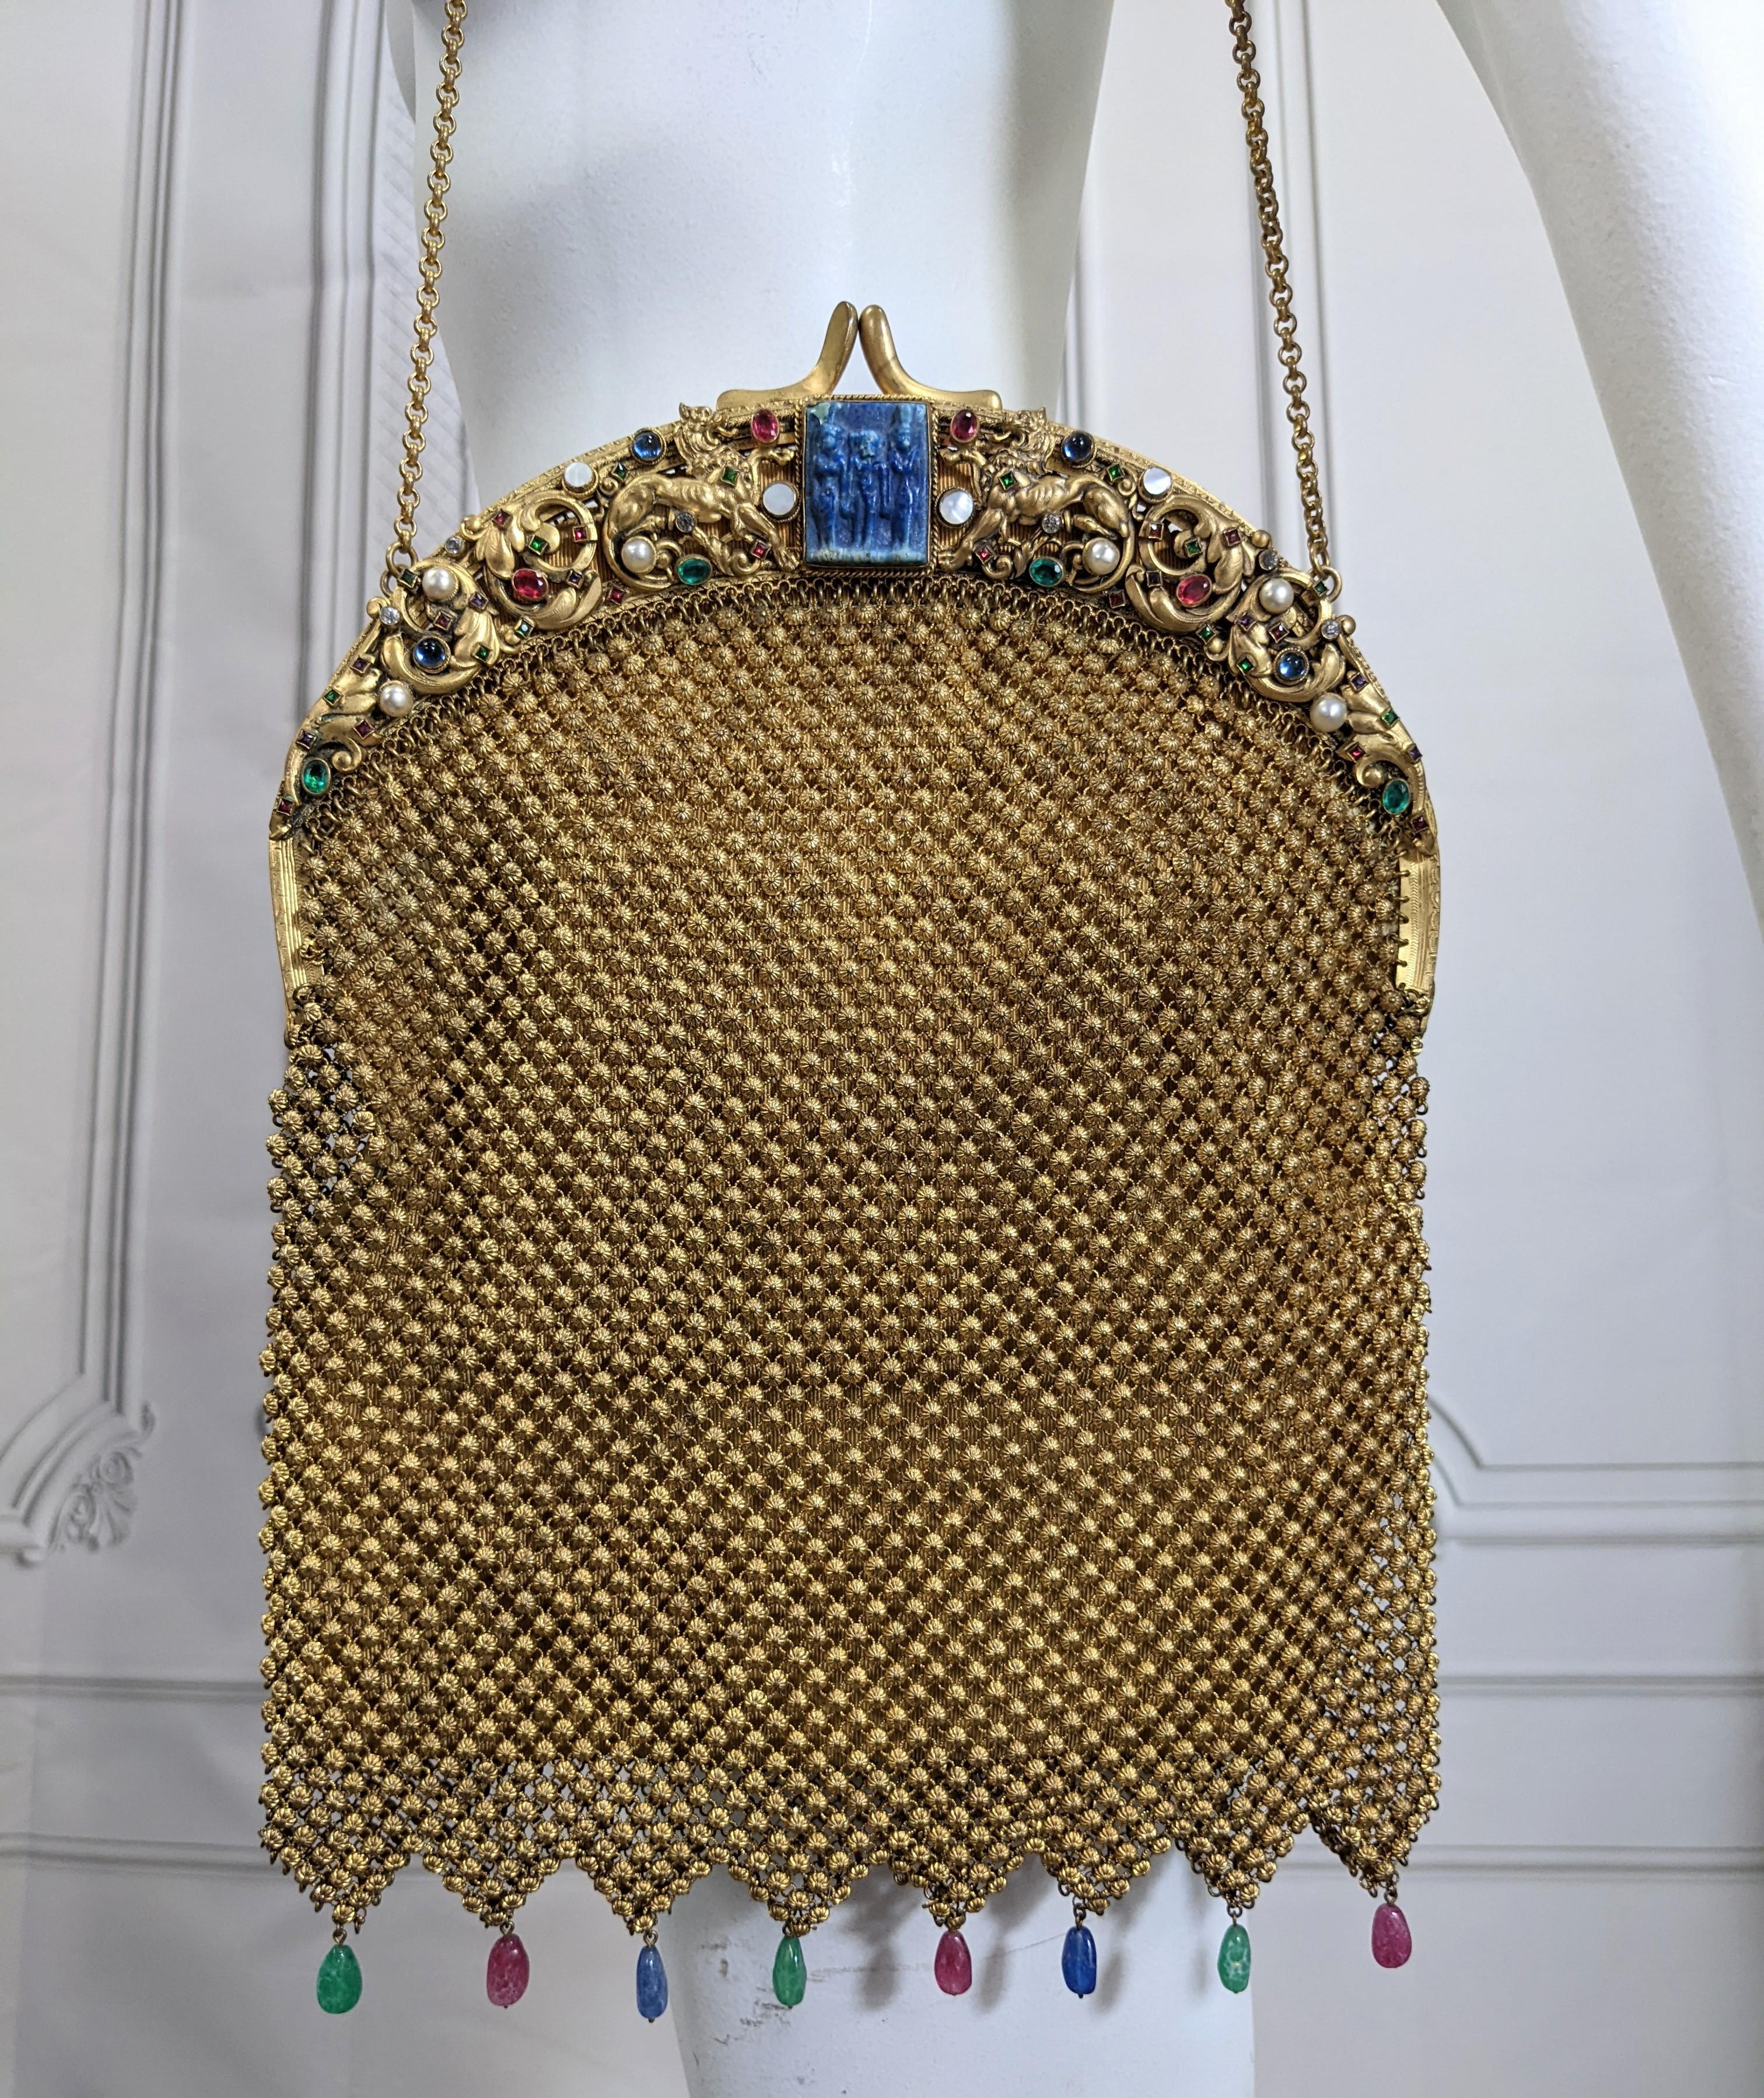 Exceptional 1920's Czech Egyptian Revival Jeweled Mesh Purse For Sale 4